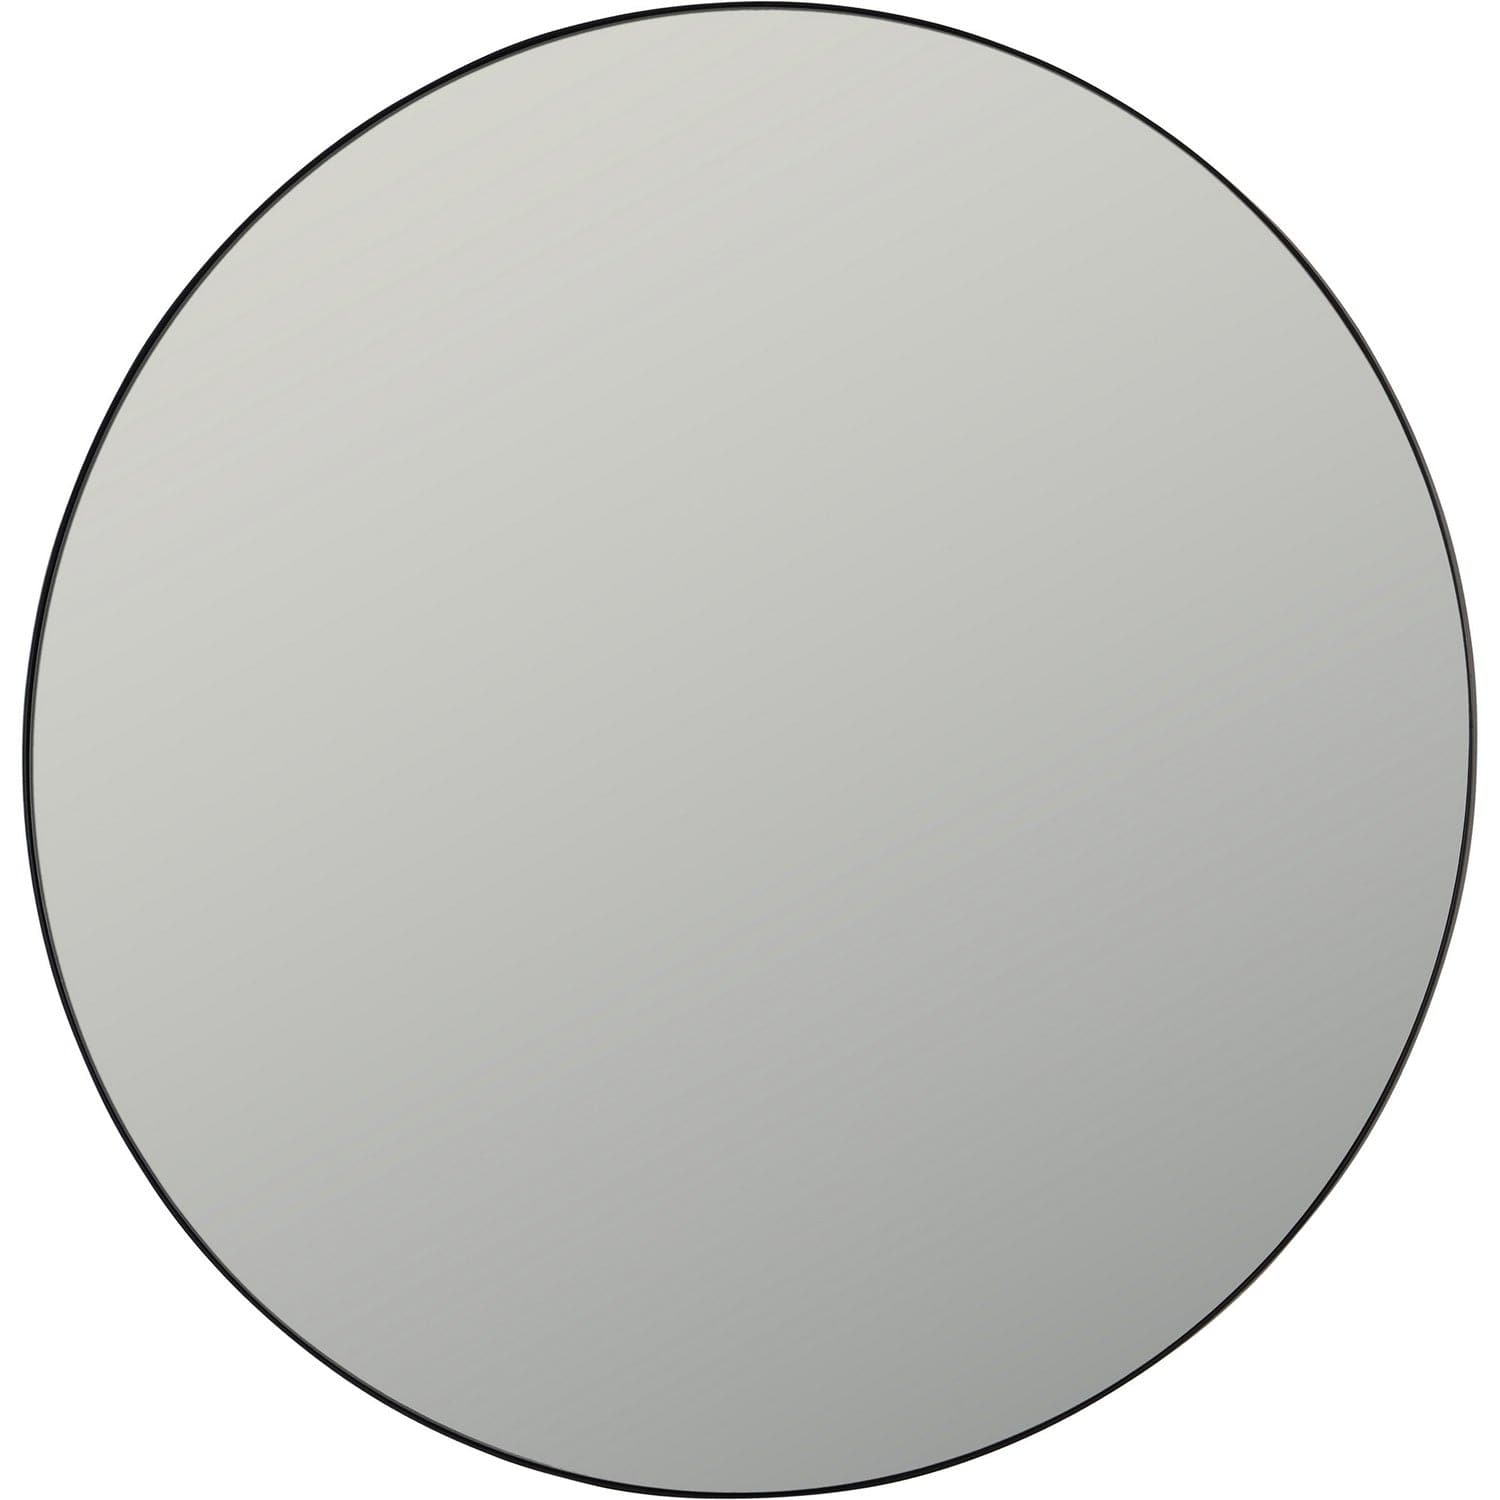 Renwil - MT2288 - Mirrors/Pictures - Mirrors-Oval/Rd.